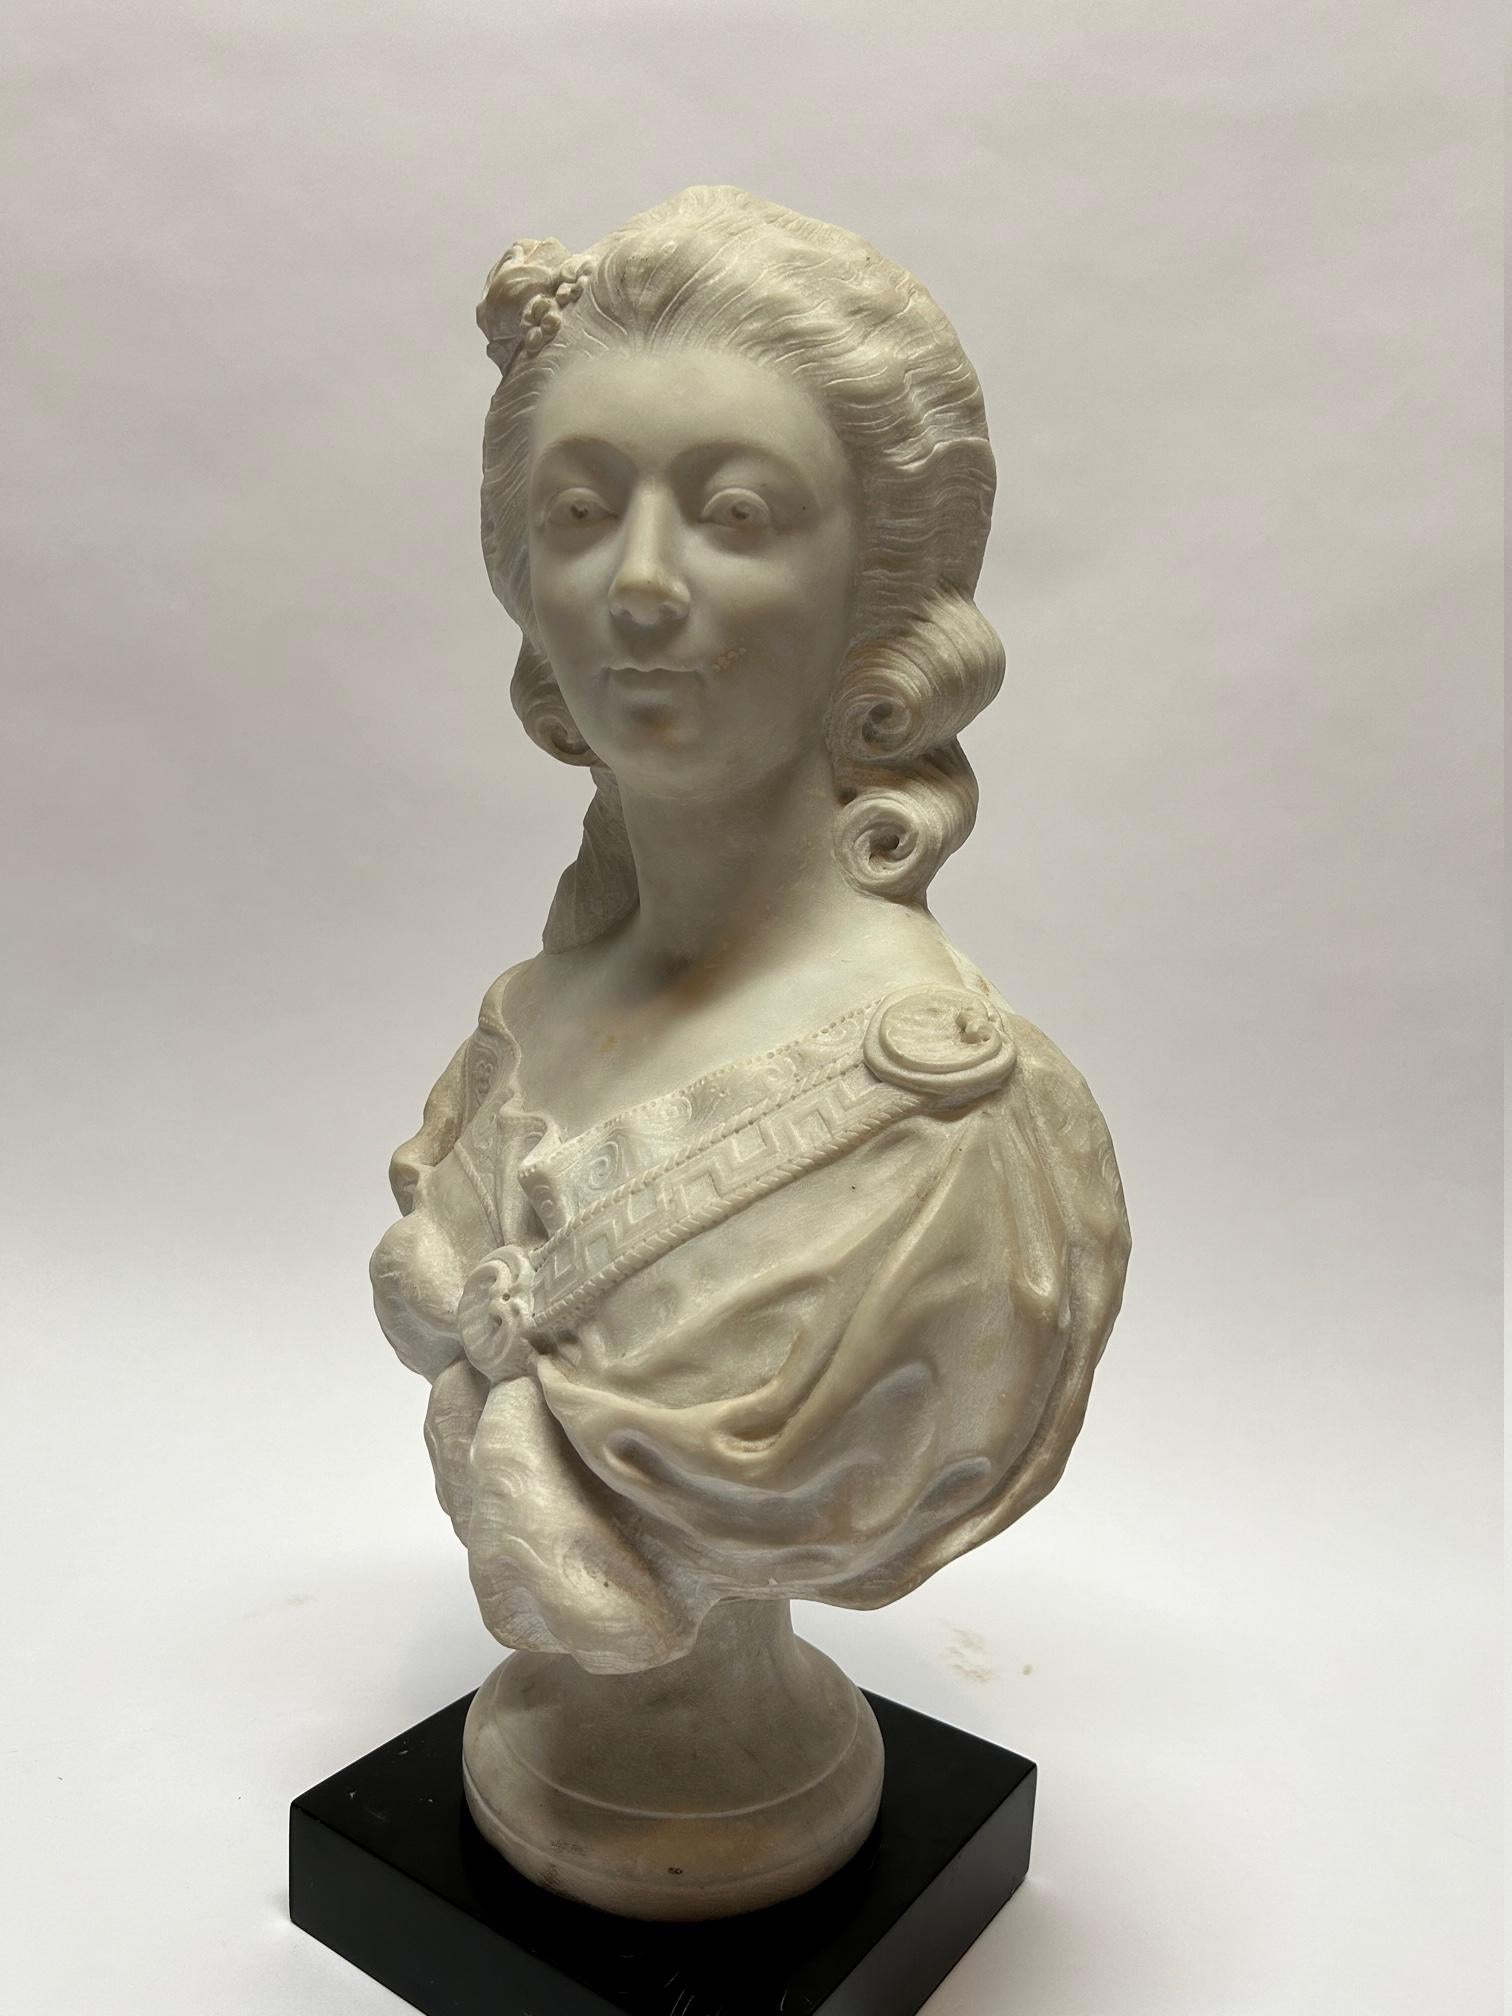 beautiful marble statue of Marie Antoinette
Queen consort of France.